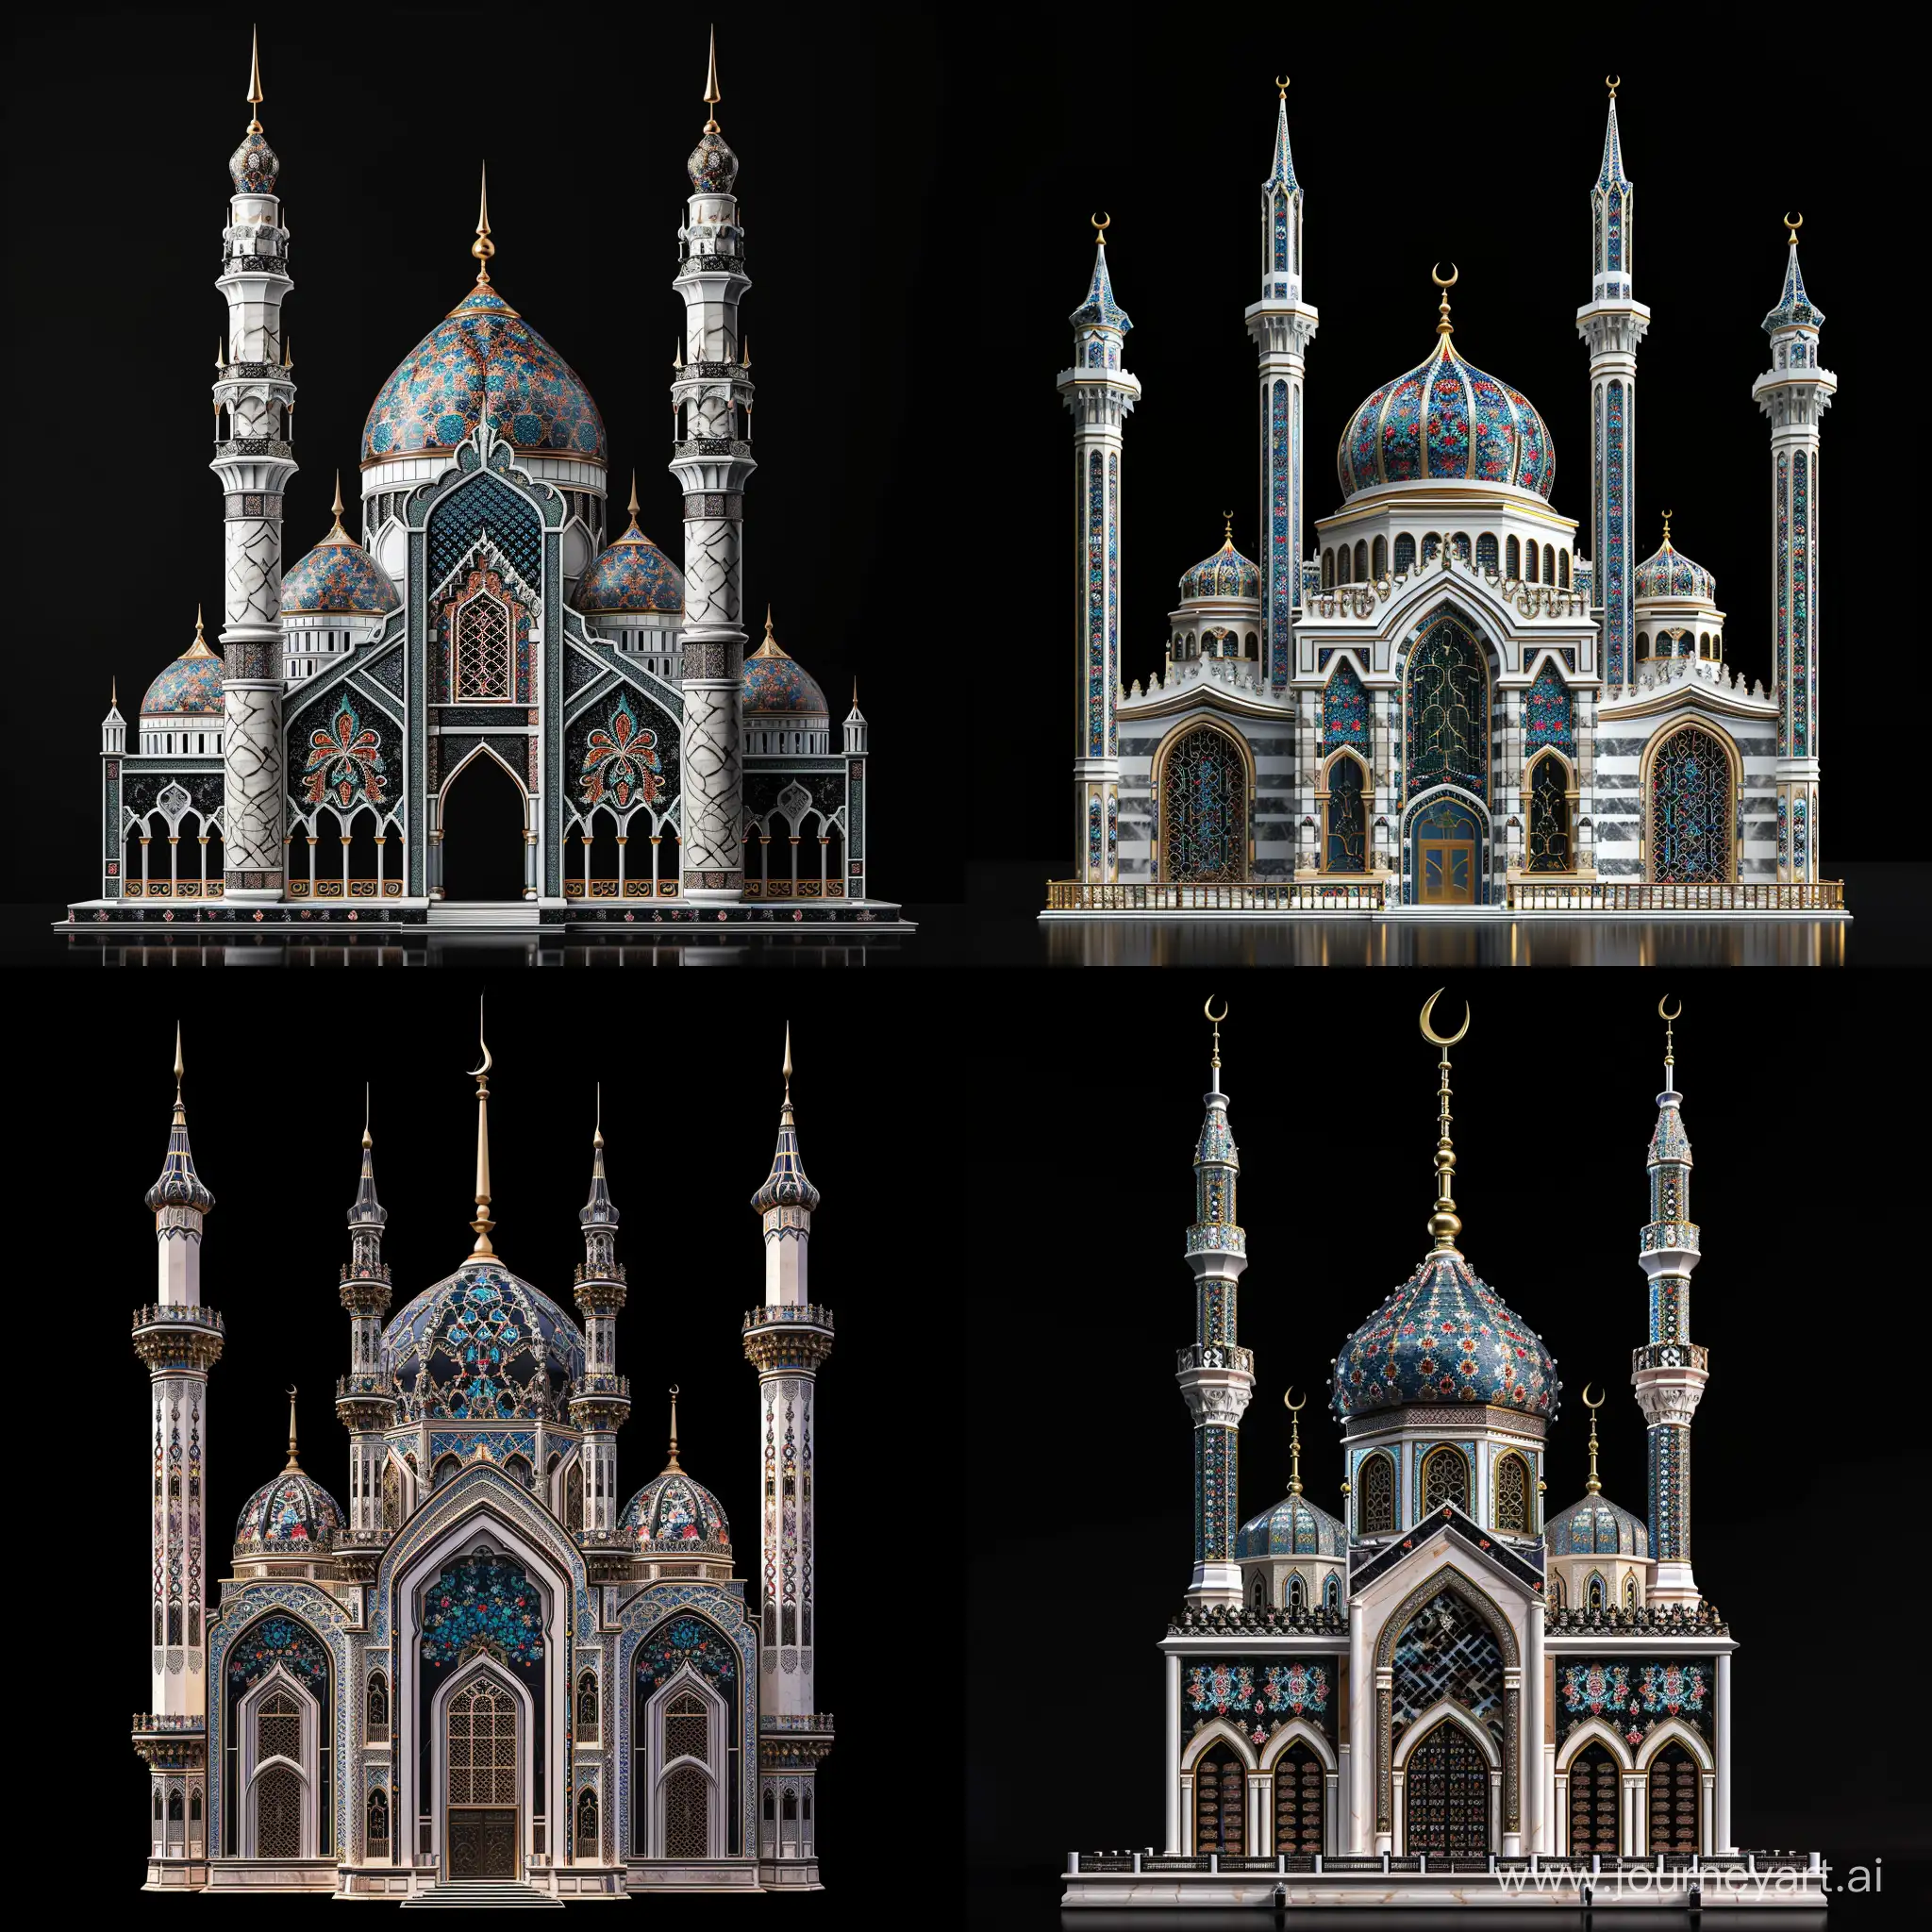 3d rendered: A highly ornamented Tall Umayyad architecture mosque, thin decorative spires amd minarets, White black caramel marbled facade, blue red finely thin floral Persian tiles on spandrels, islamic openwork lattice windows, shiny gold finial, multi storey, black background, full view, front view, symmetric --v 6